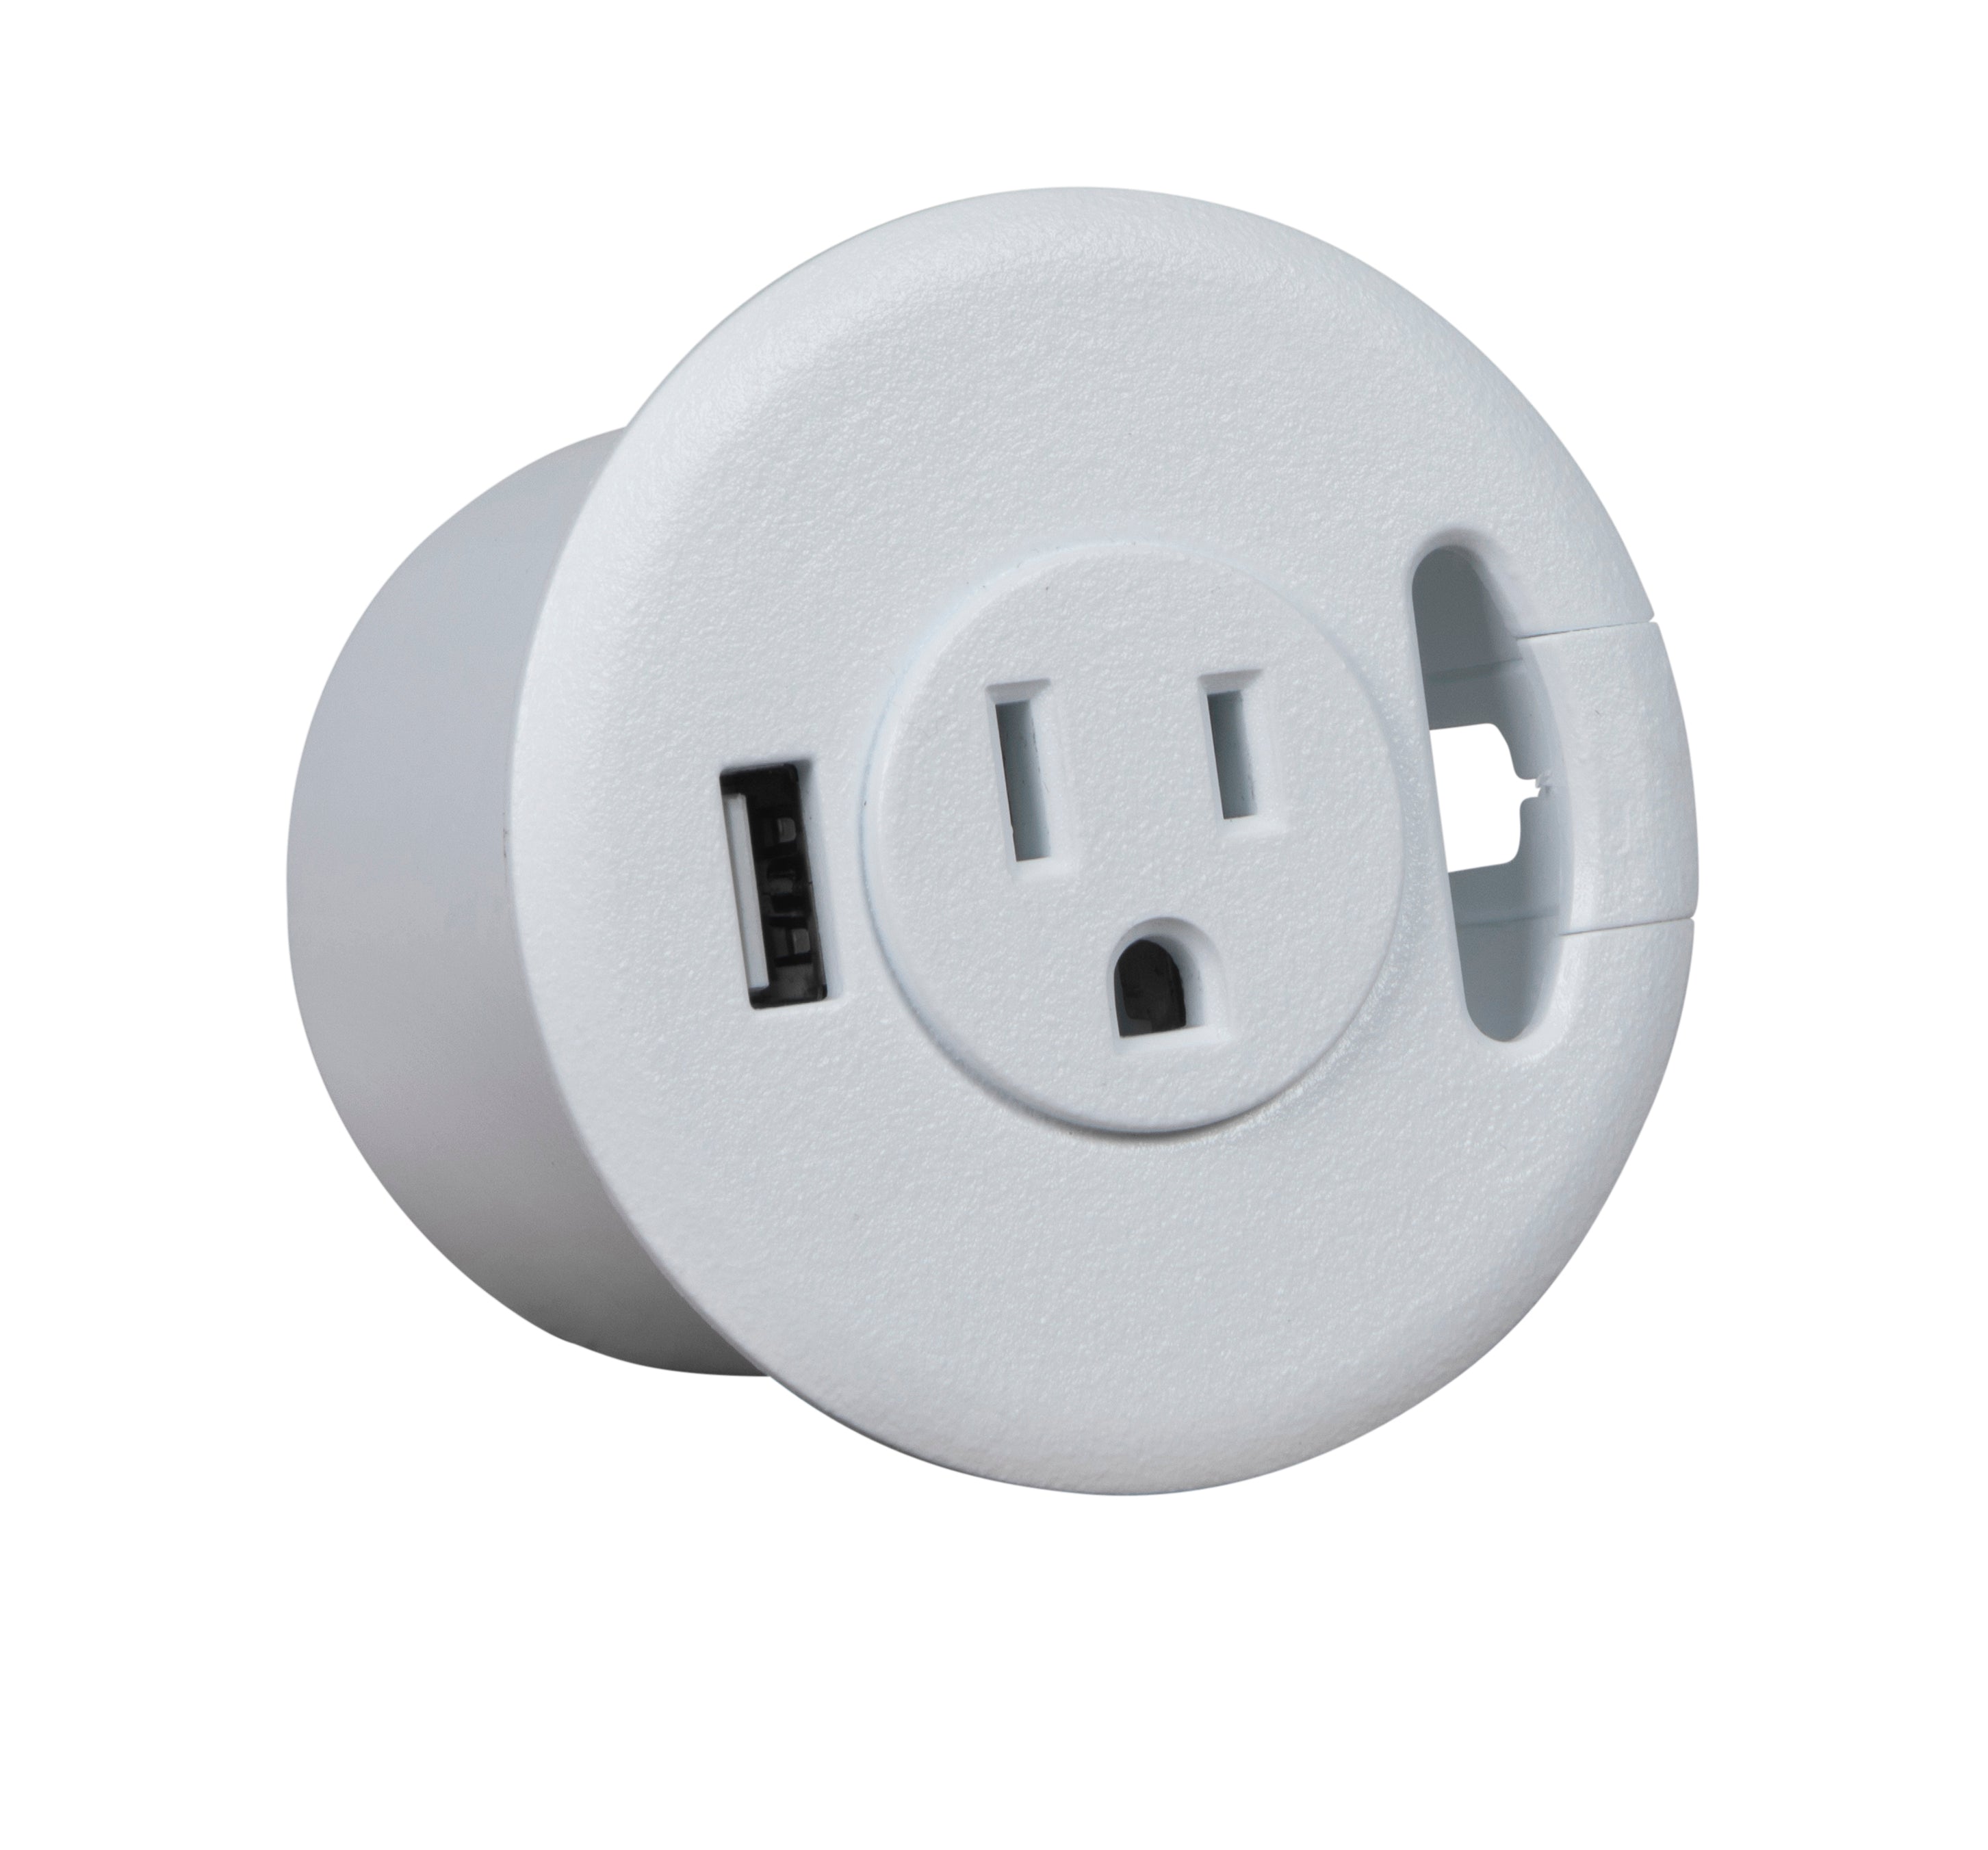 Table Top Power & USB Grommet Hole Adapter, White